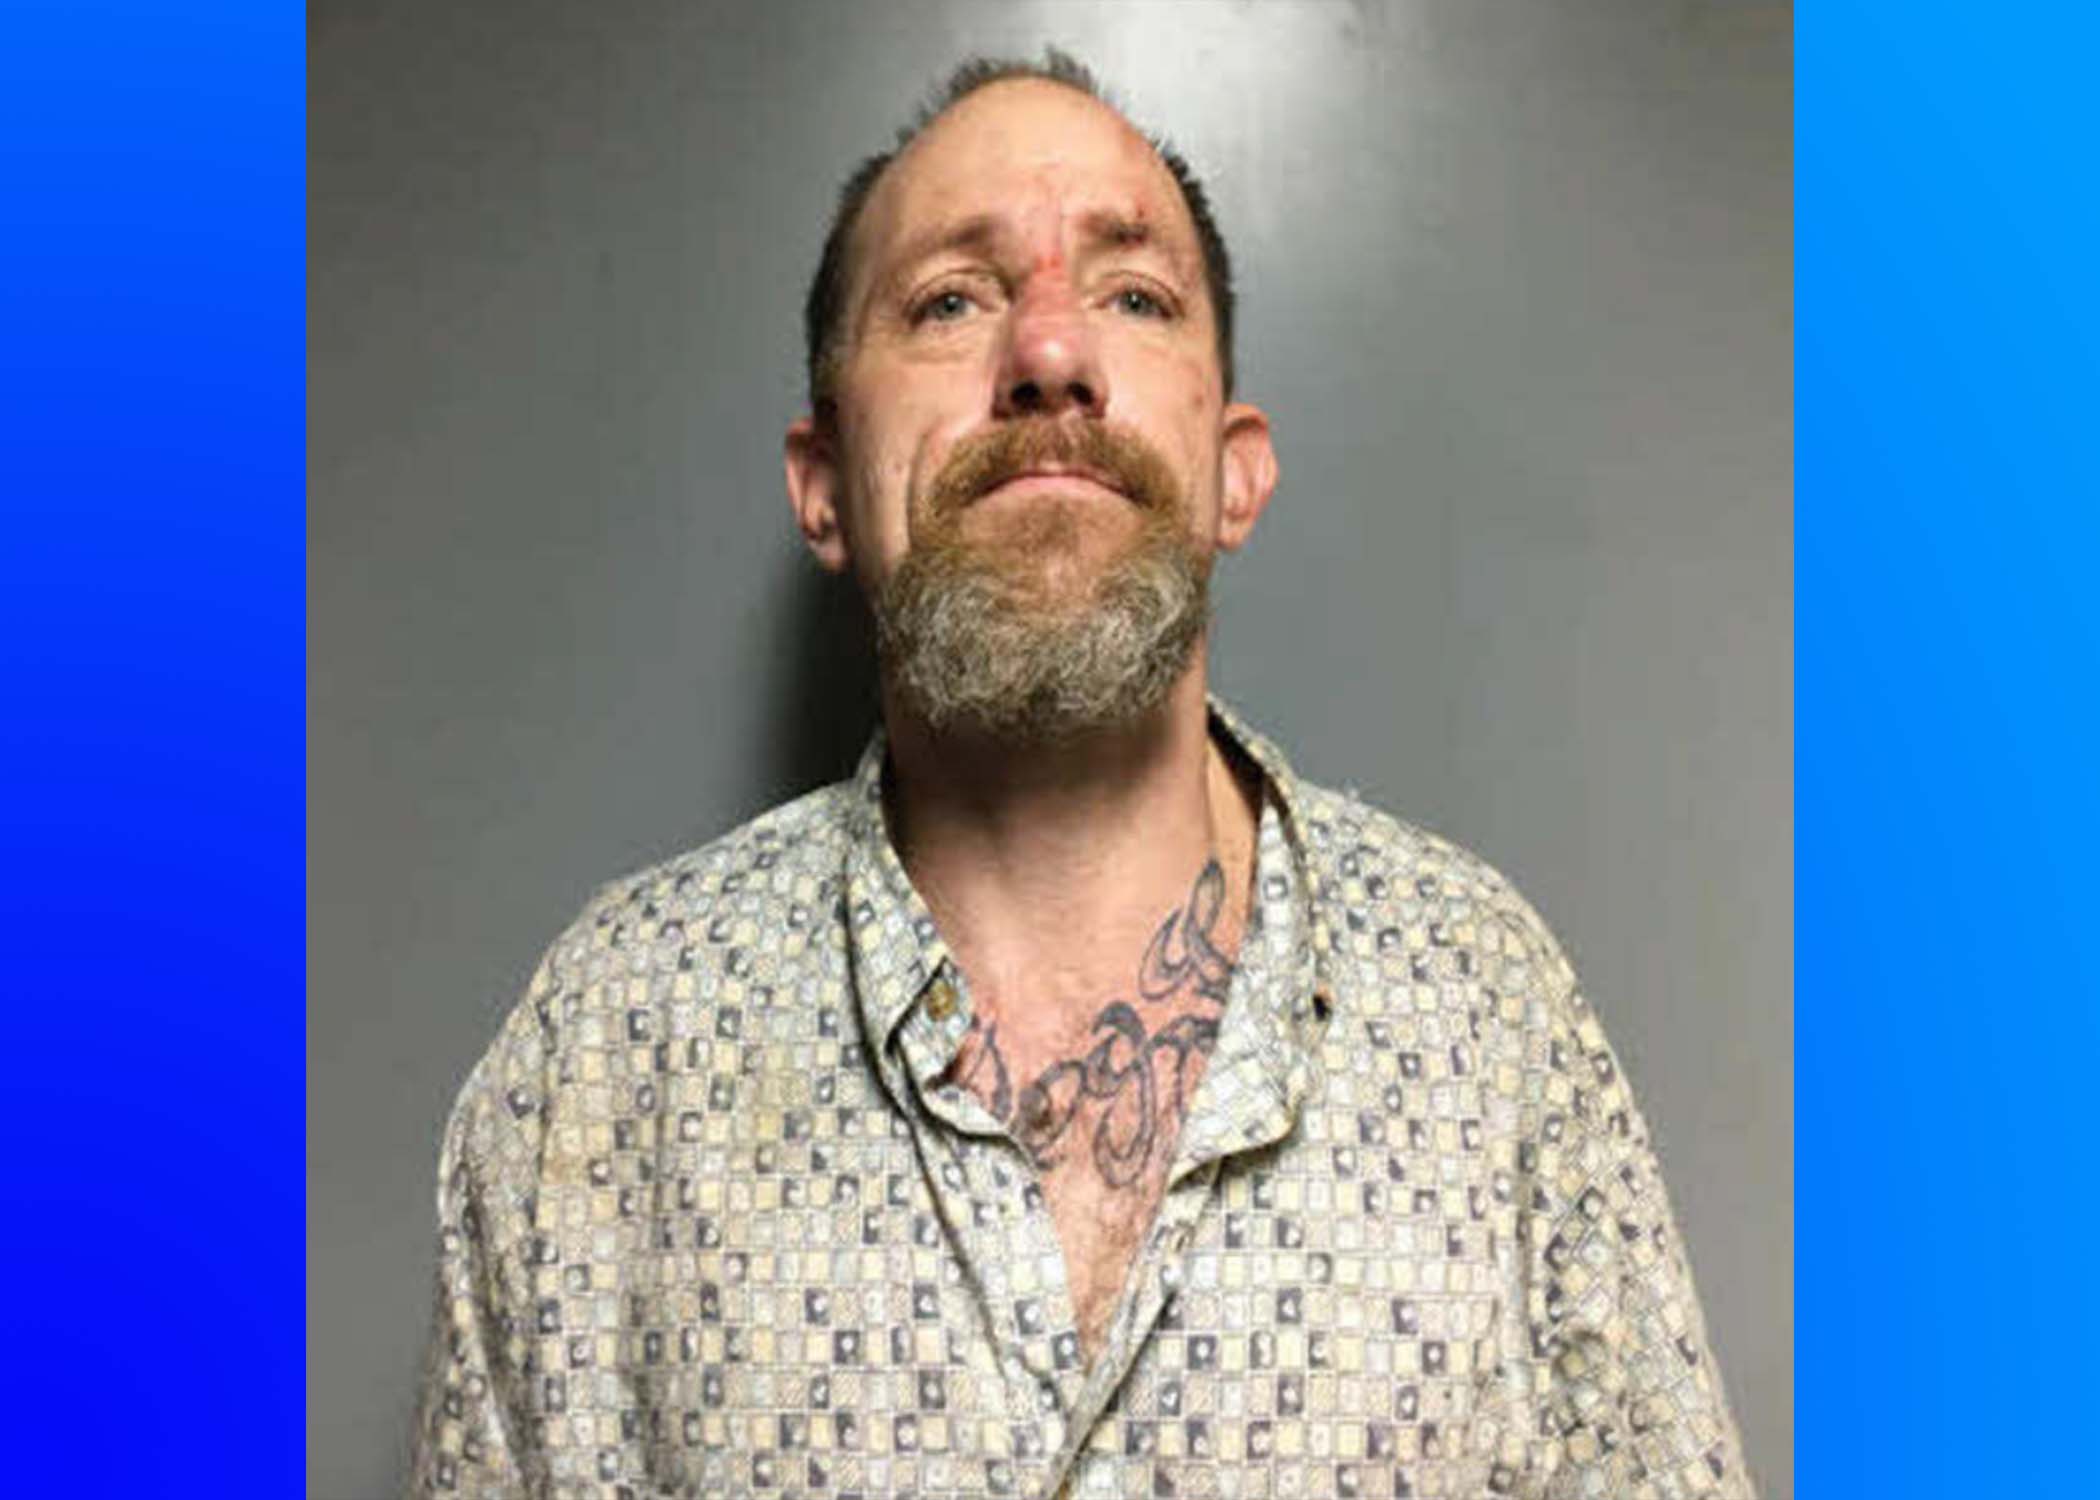 St. Clair County man arrested for multiple felony charges after eluding police